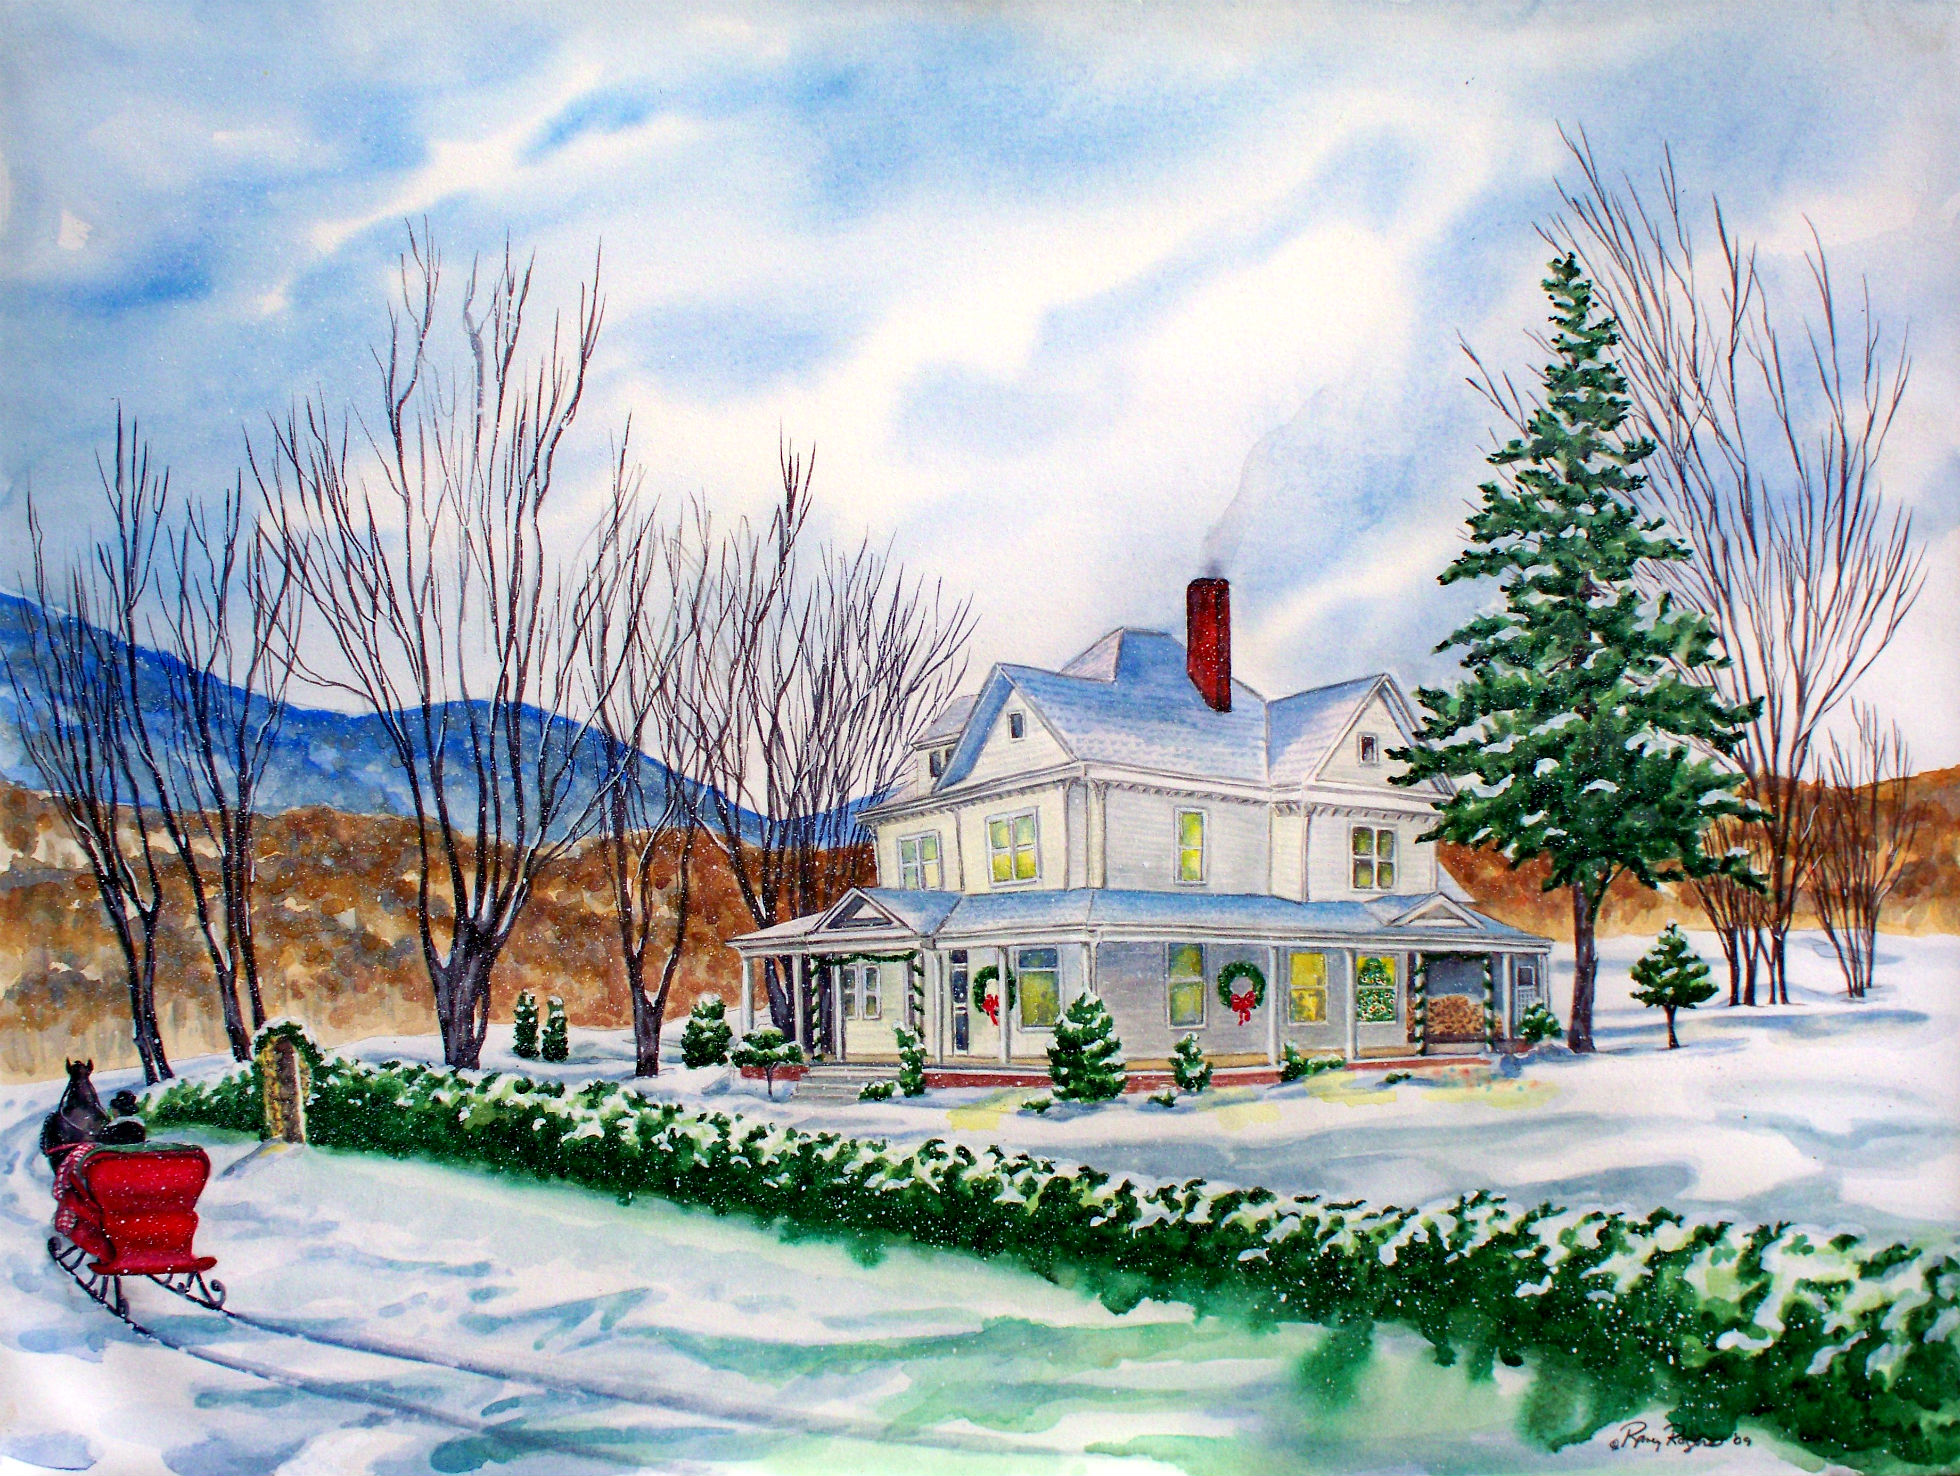 snow, painting, holiday, christmas, cart, horse, house, tree